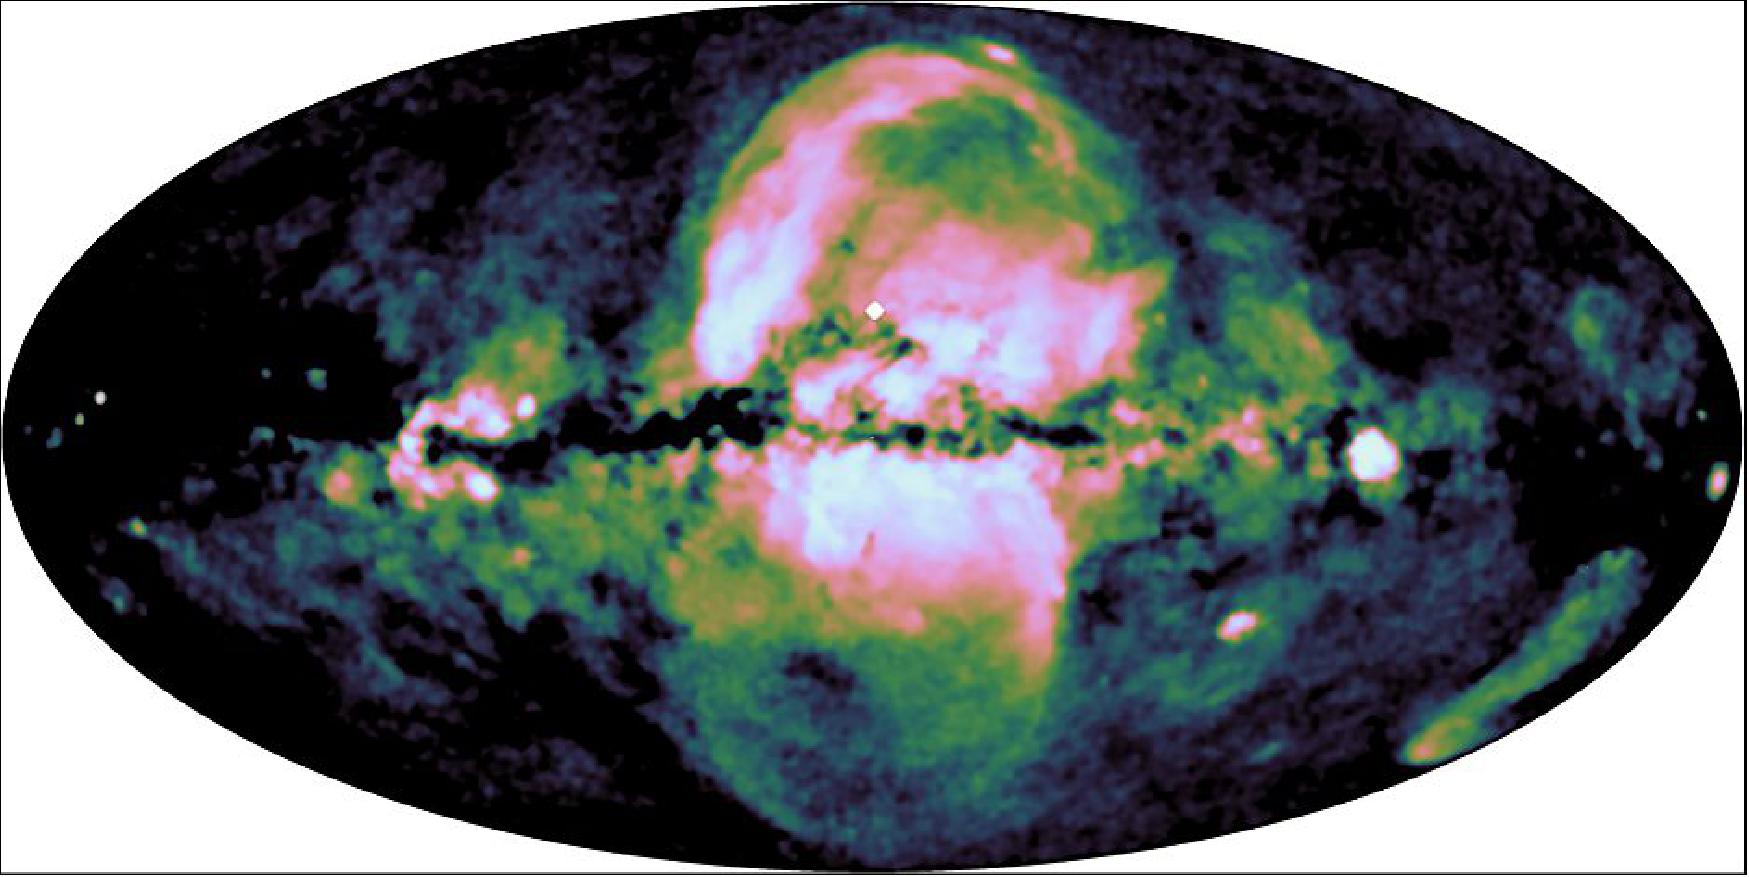 Figure 18: The eROSITA bubbles. The this false-color map the extended emission at energies of 0.6-1.0 keV is highlighted. The contribution of the point sources was removed and the scaling adjusted to enhance large-scale structures in our Galaxy (image credit: MPE/IKI)